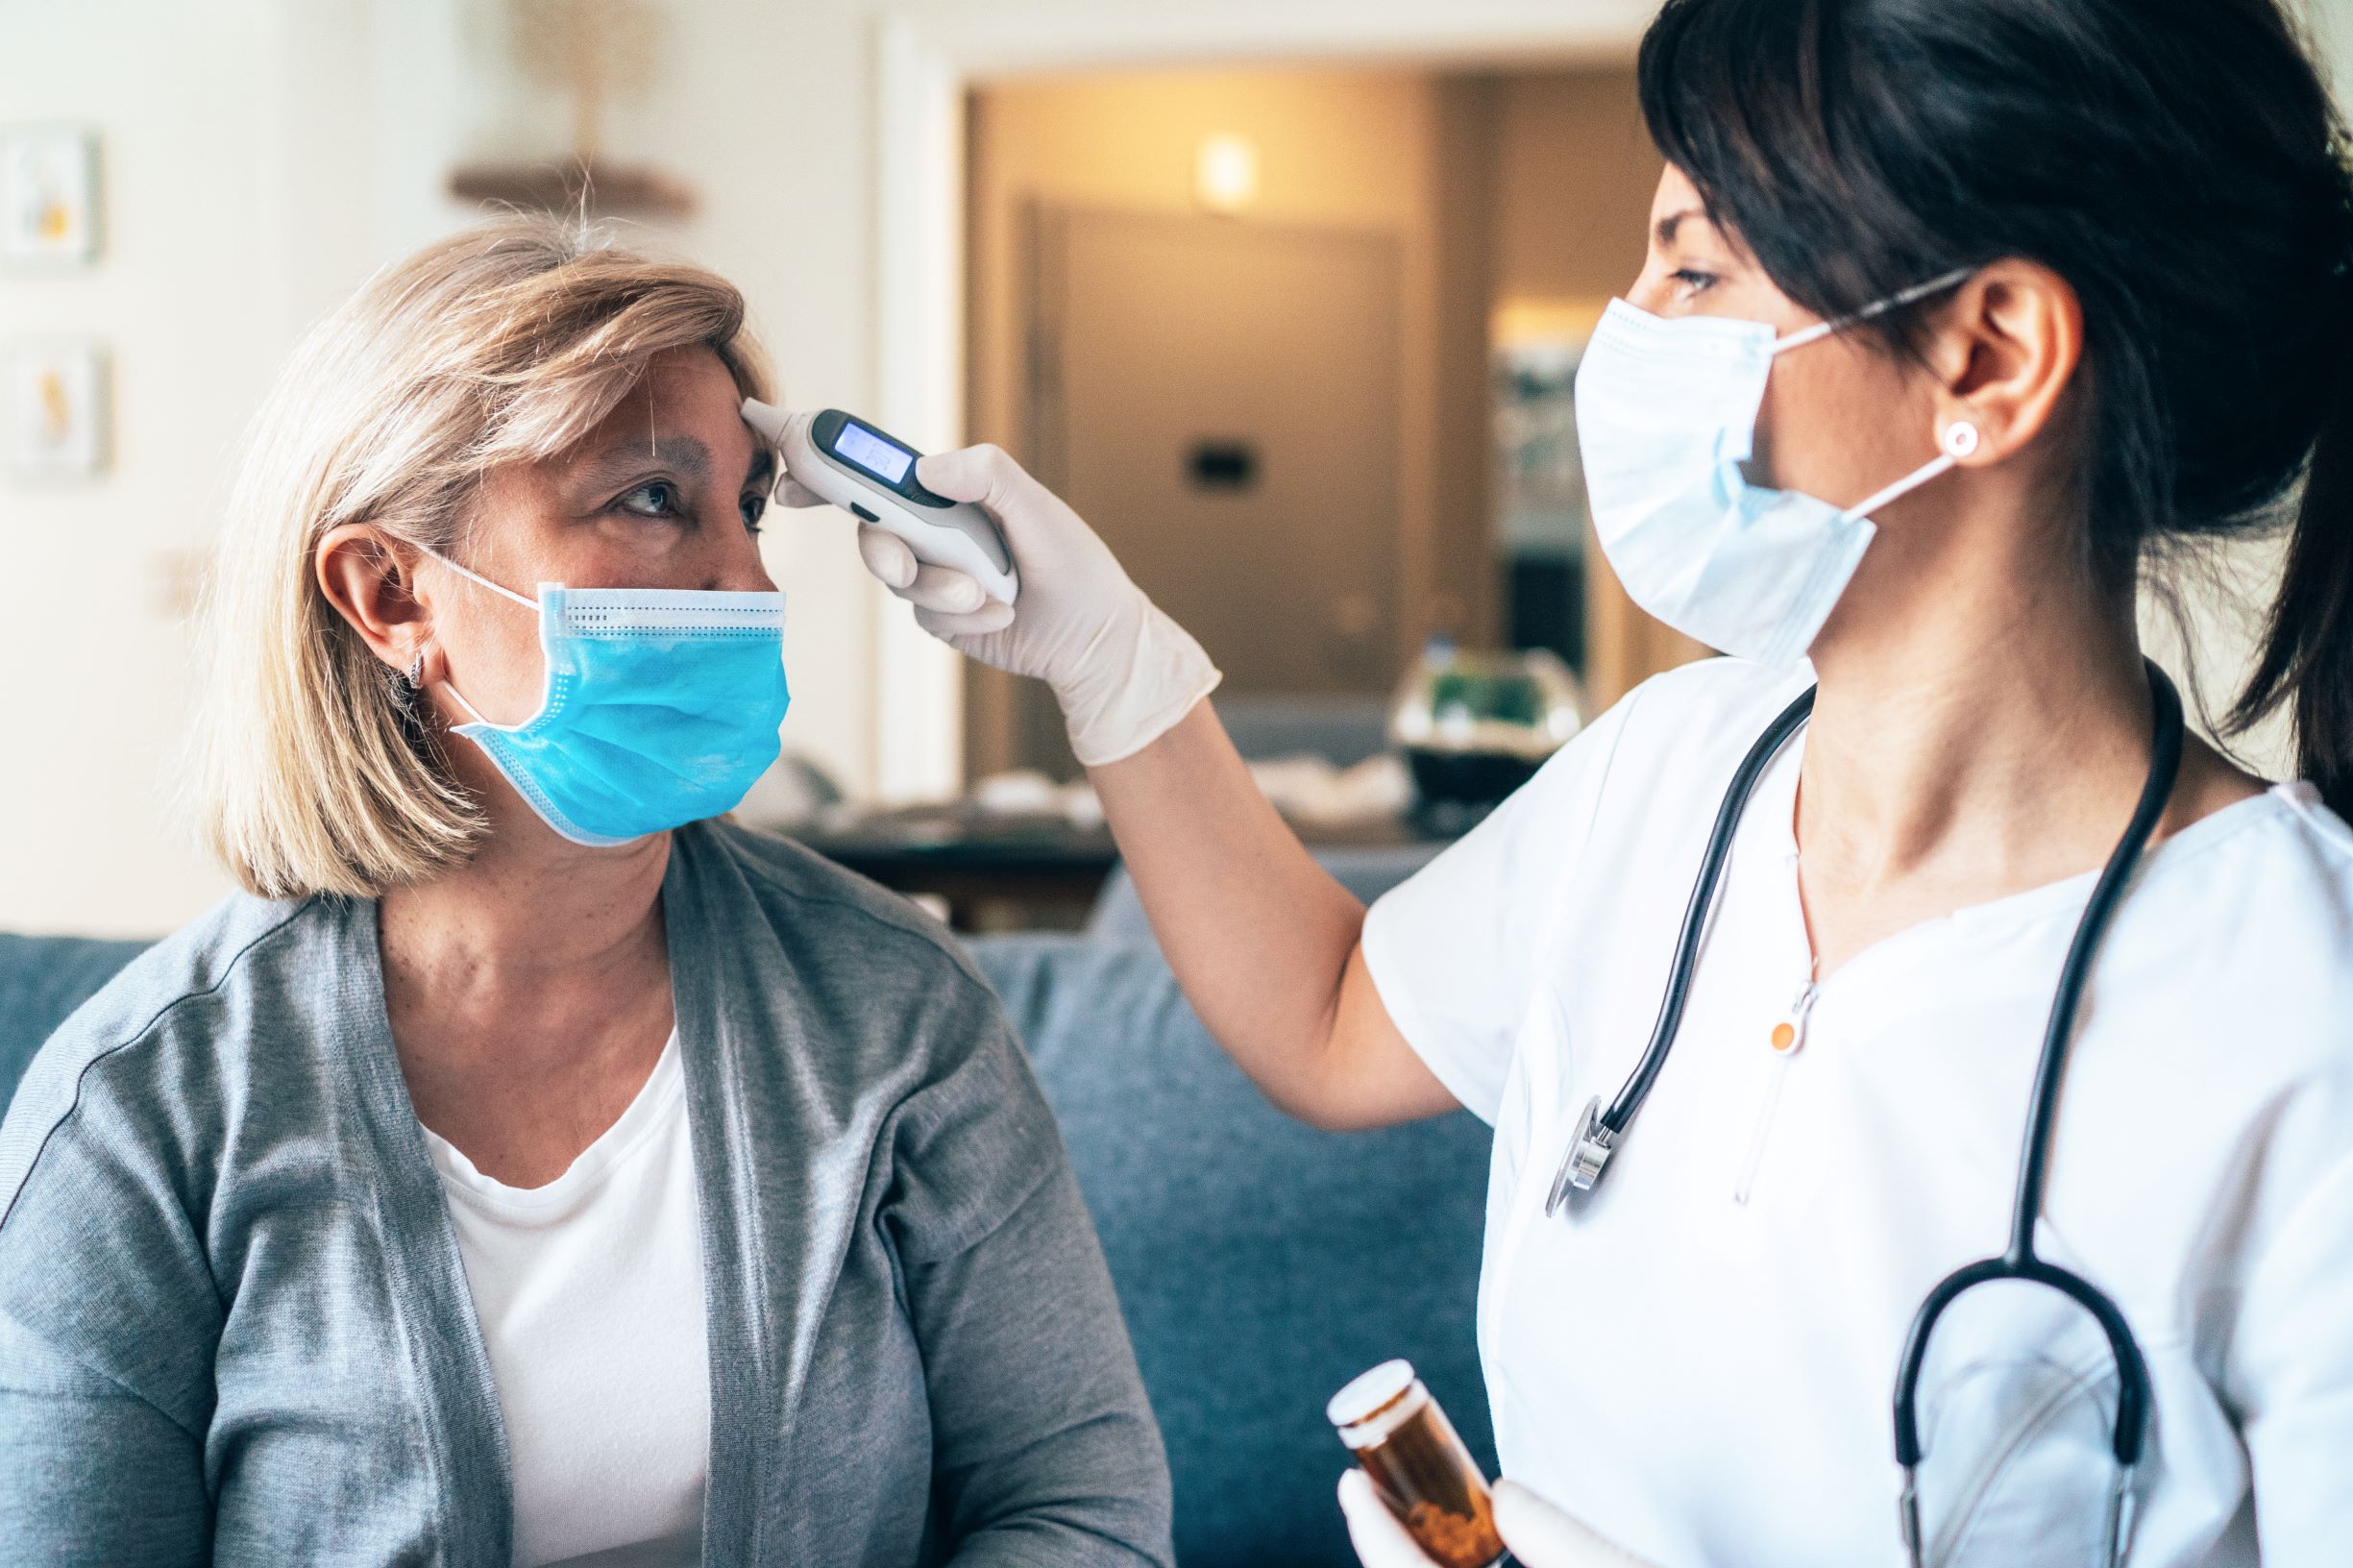 Obesity increases the risk for COVID-19 complications for various reasons, as obesity itself opens people up to many health conditions. In this image, a medical provider takes a patient's temperature. Both are wearing masks over their nose and mouth.